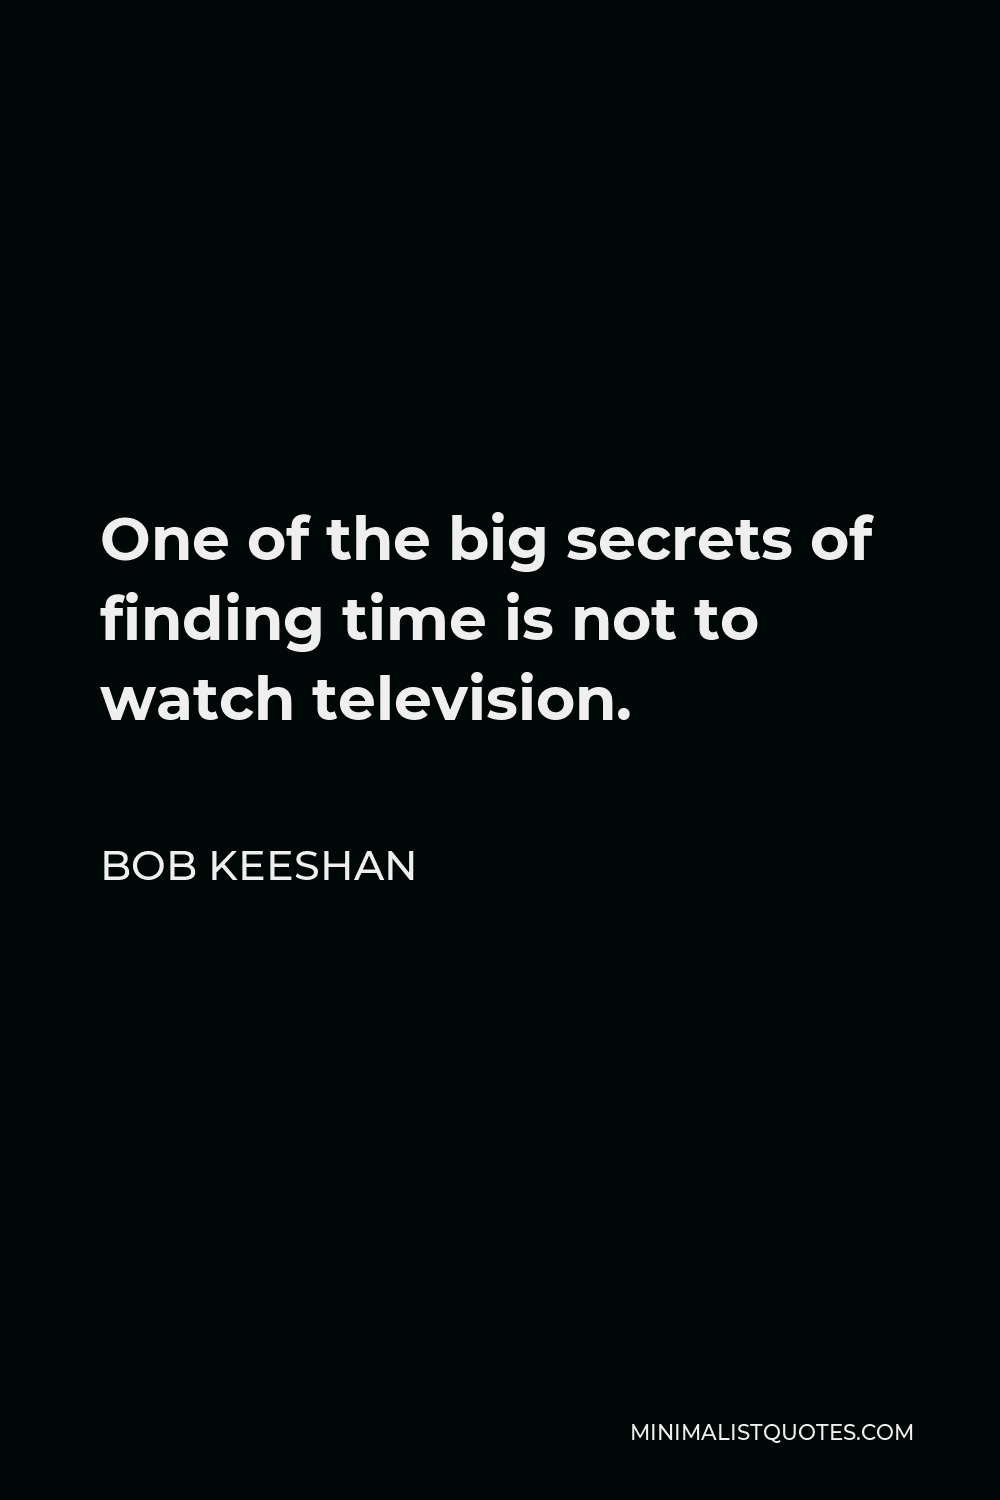 Bob Keeshan Quote - One of the big secrets of finding time is not to watch television.